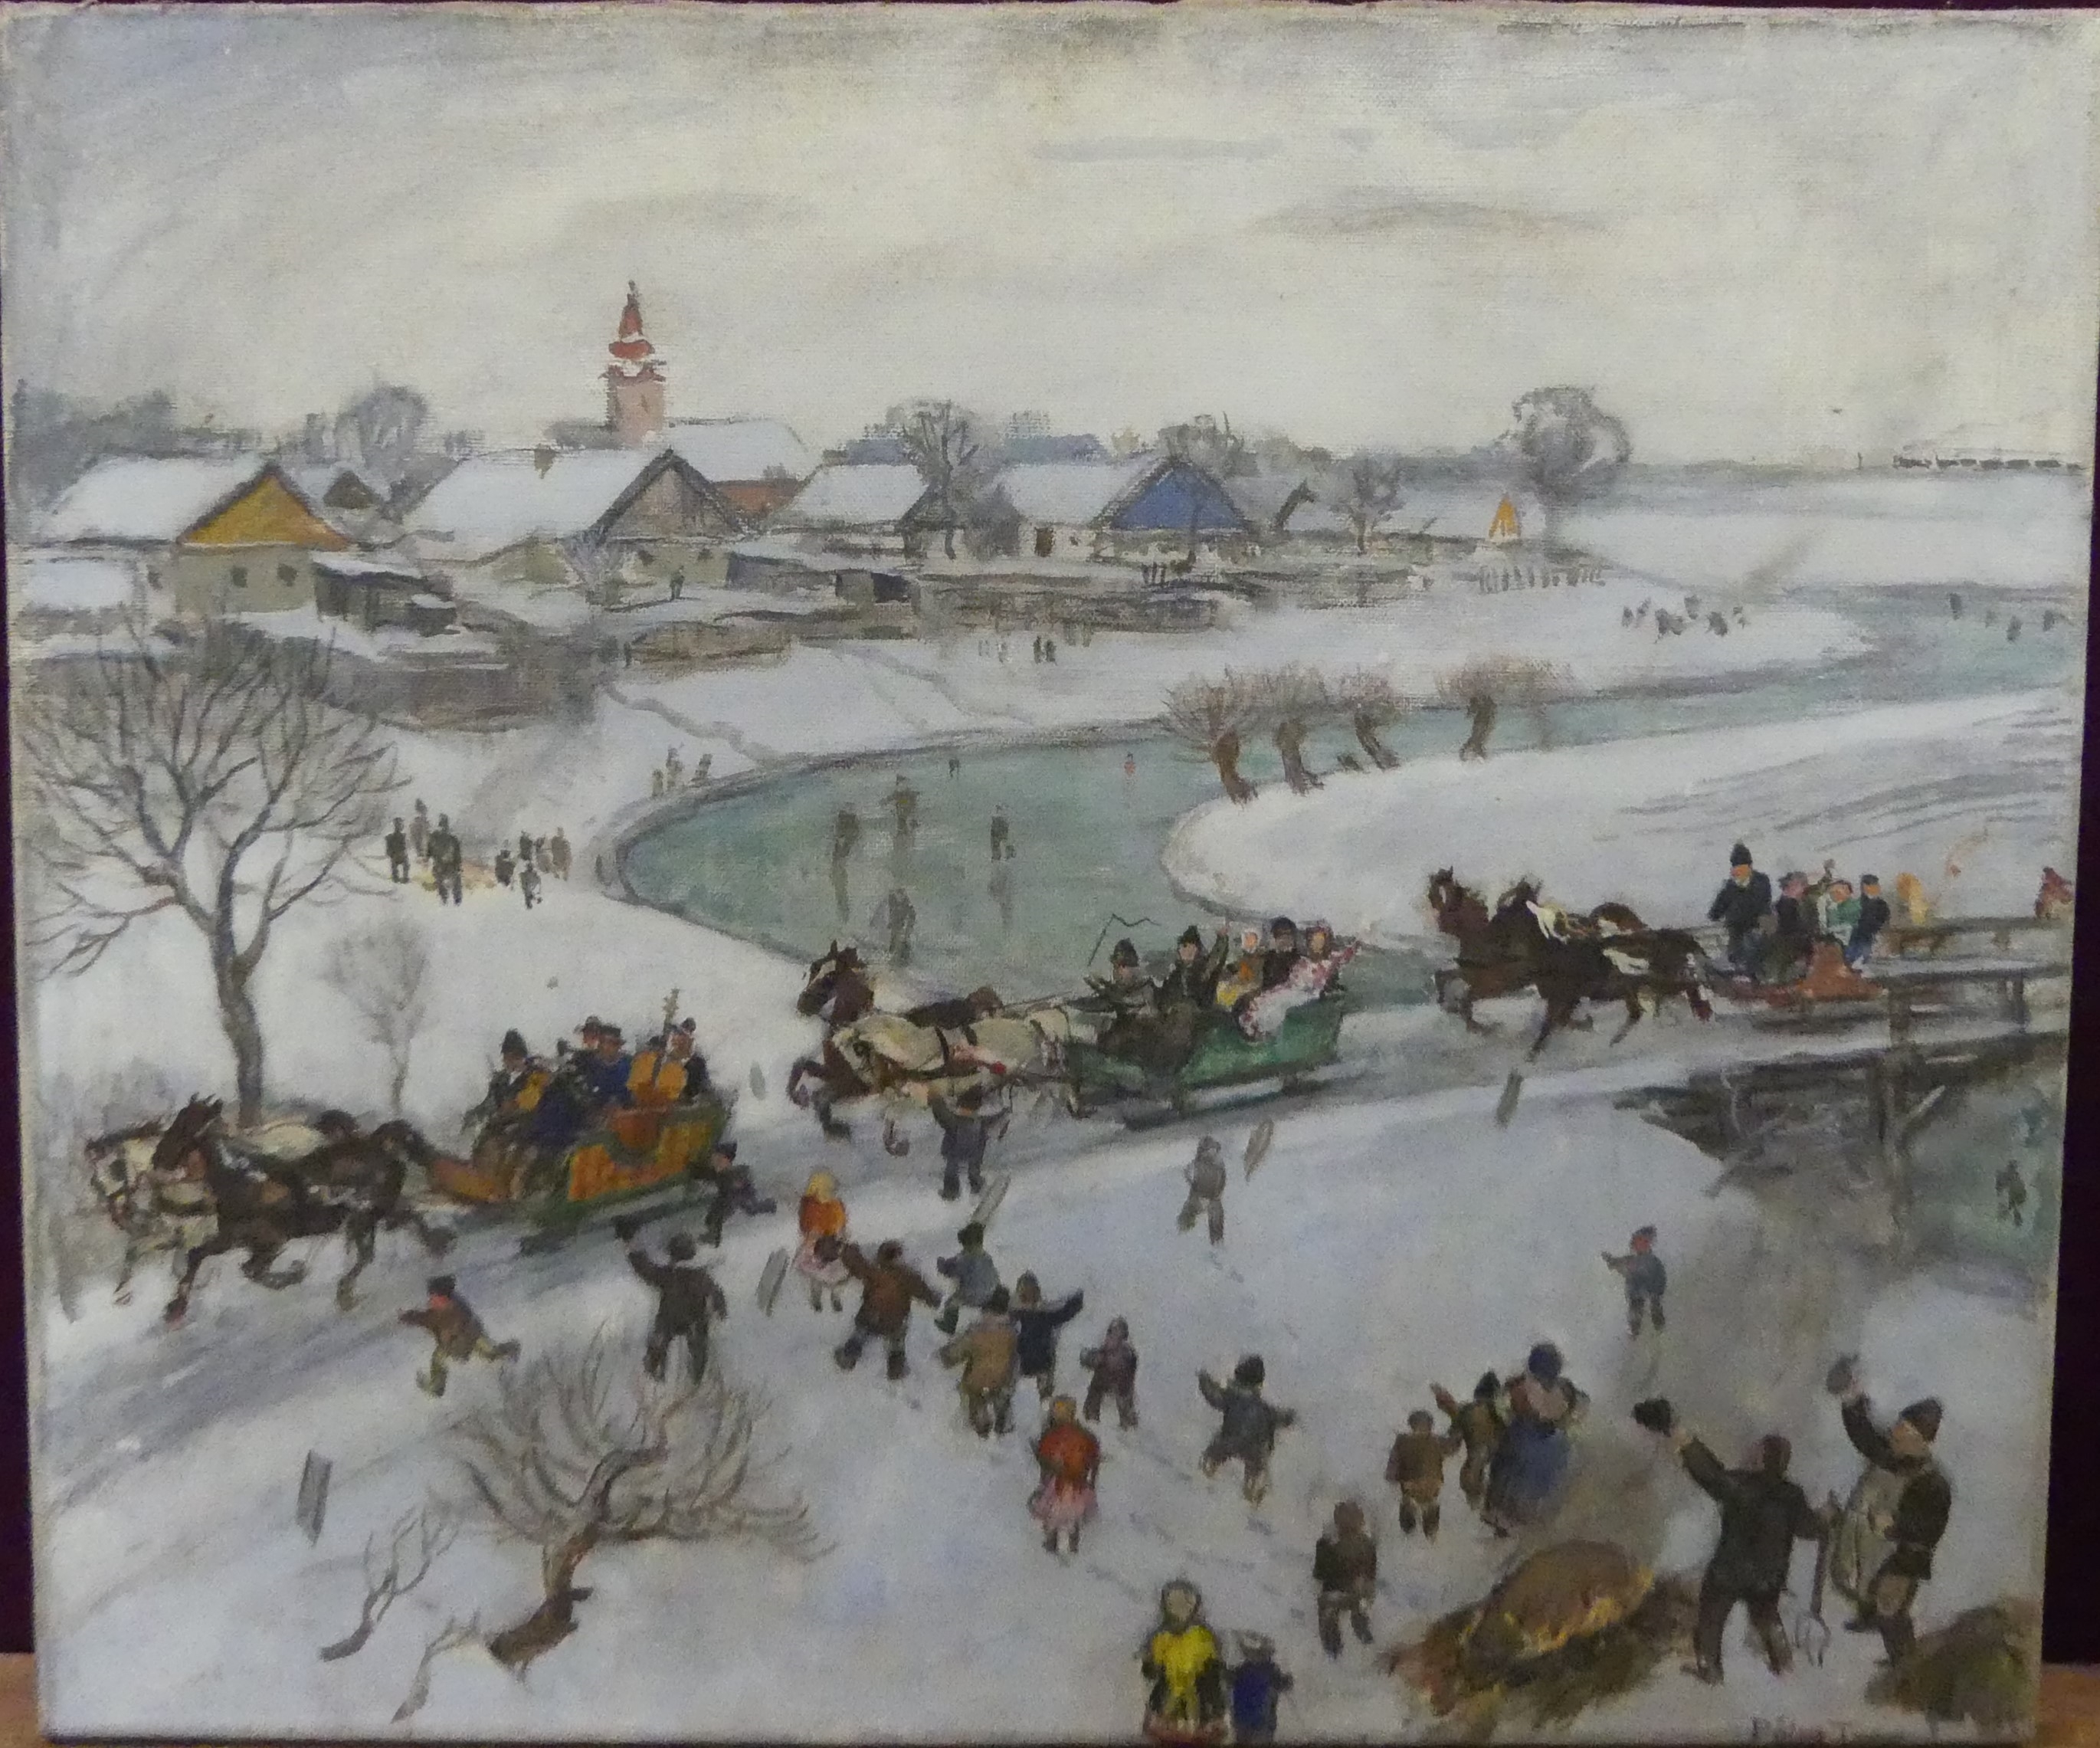 - Continental scene; playing in the snow with chariot and buildings beyond - Tibor Polya